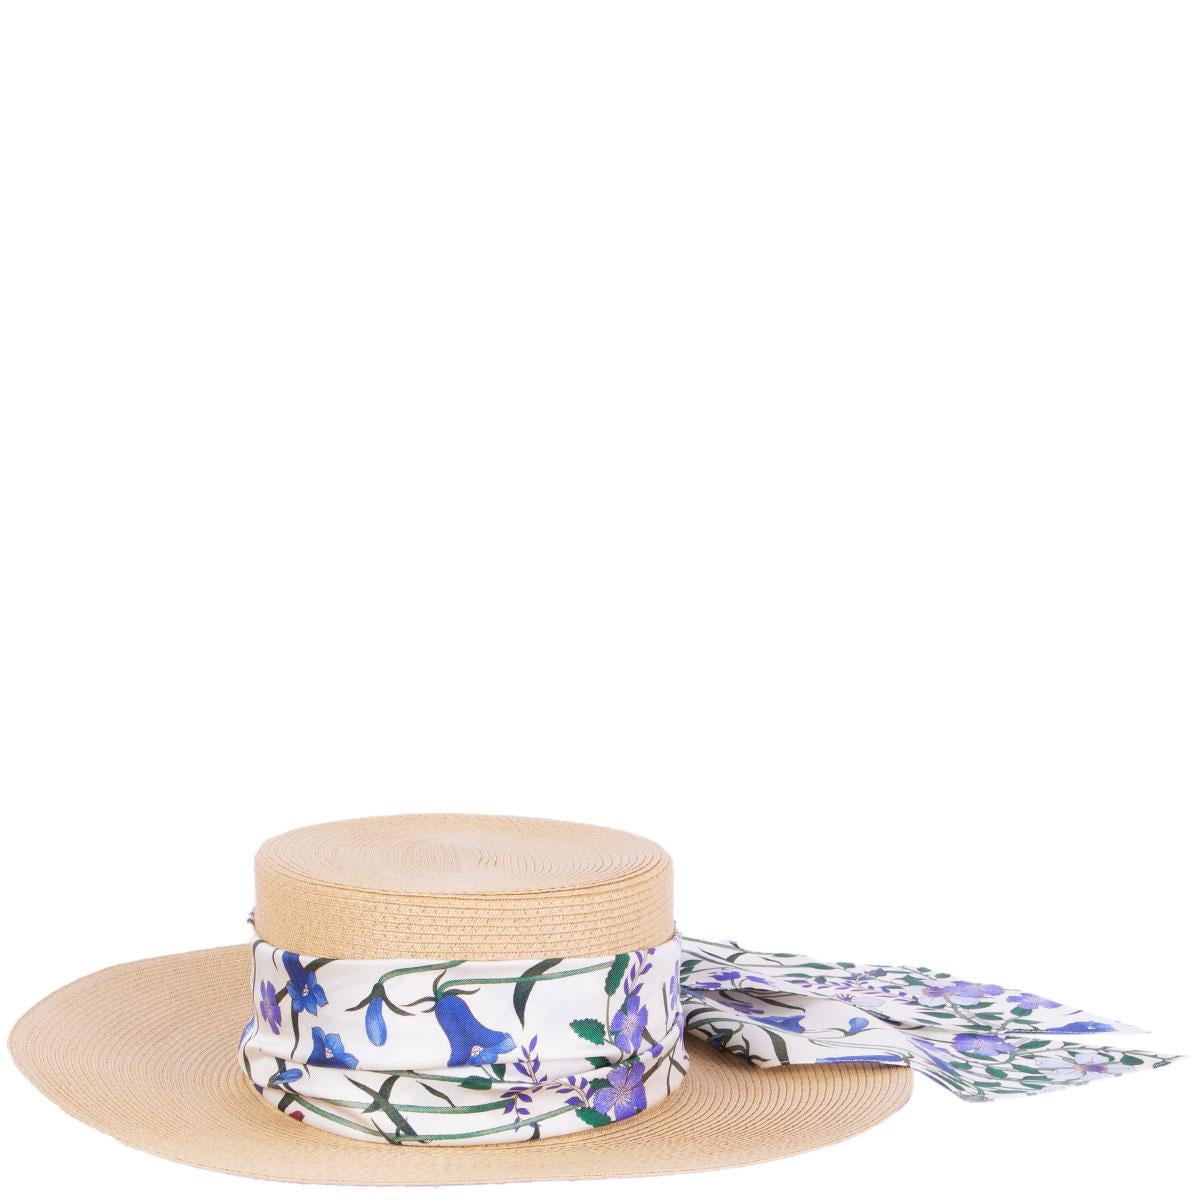 Gucci Alba wide brimmed beige straw hat floral-patterned silk ribbon around. Has been worn and is in excellent condition. 